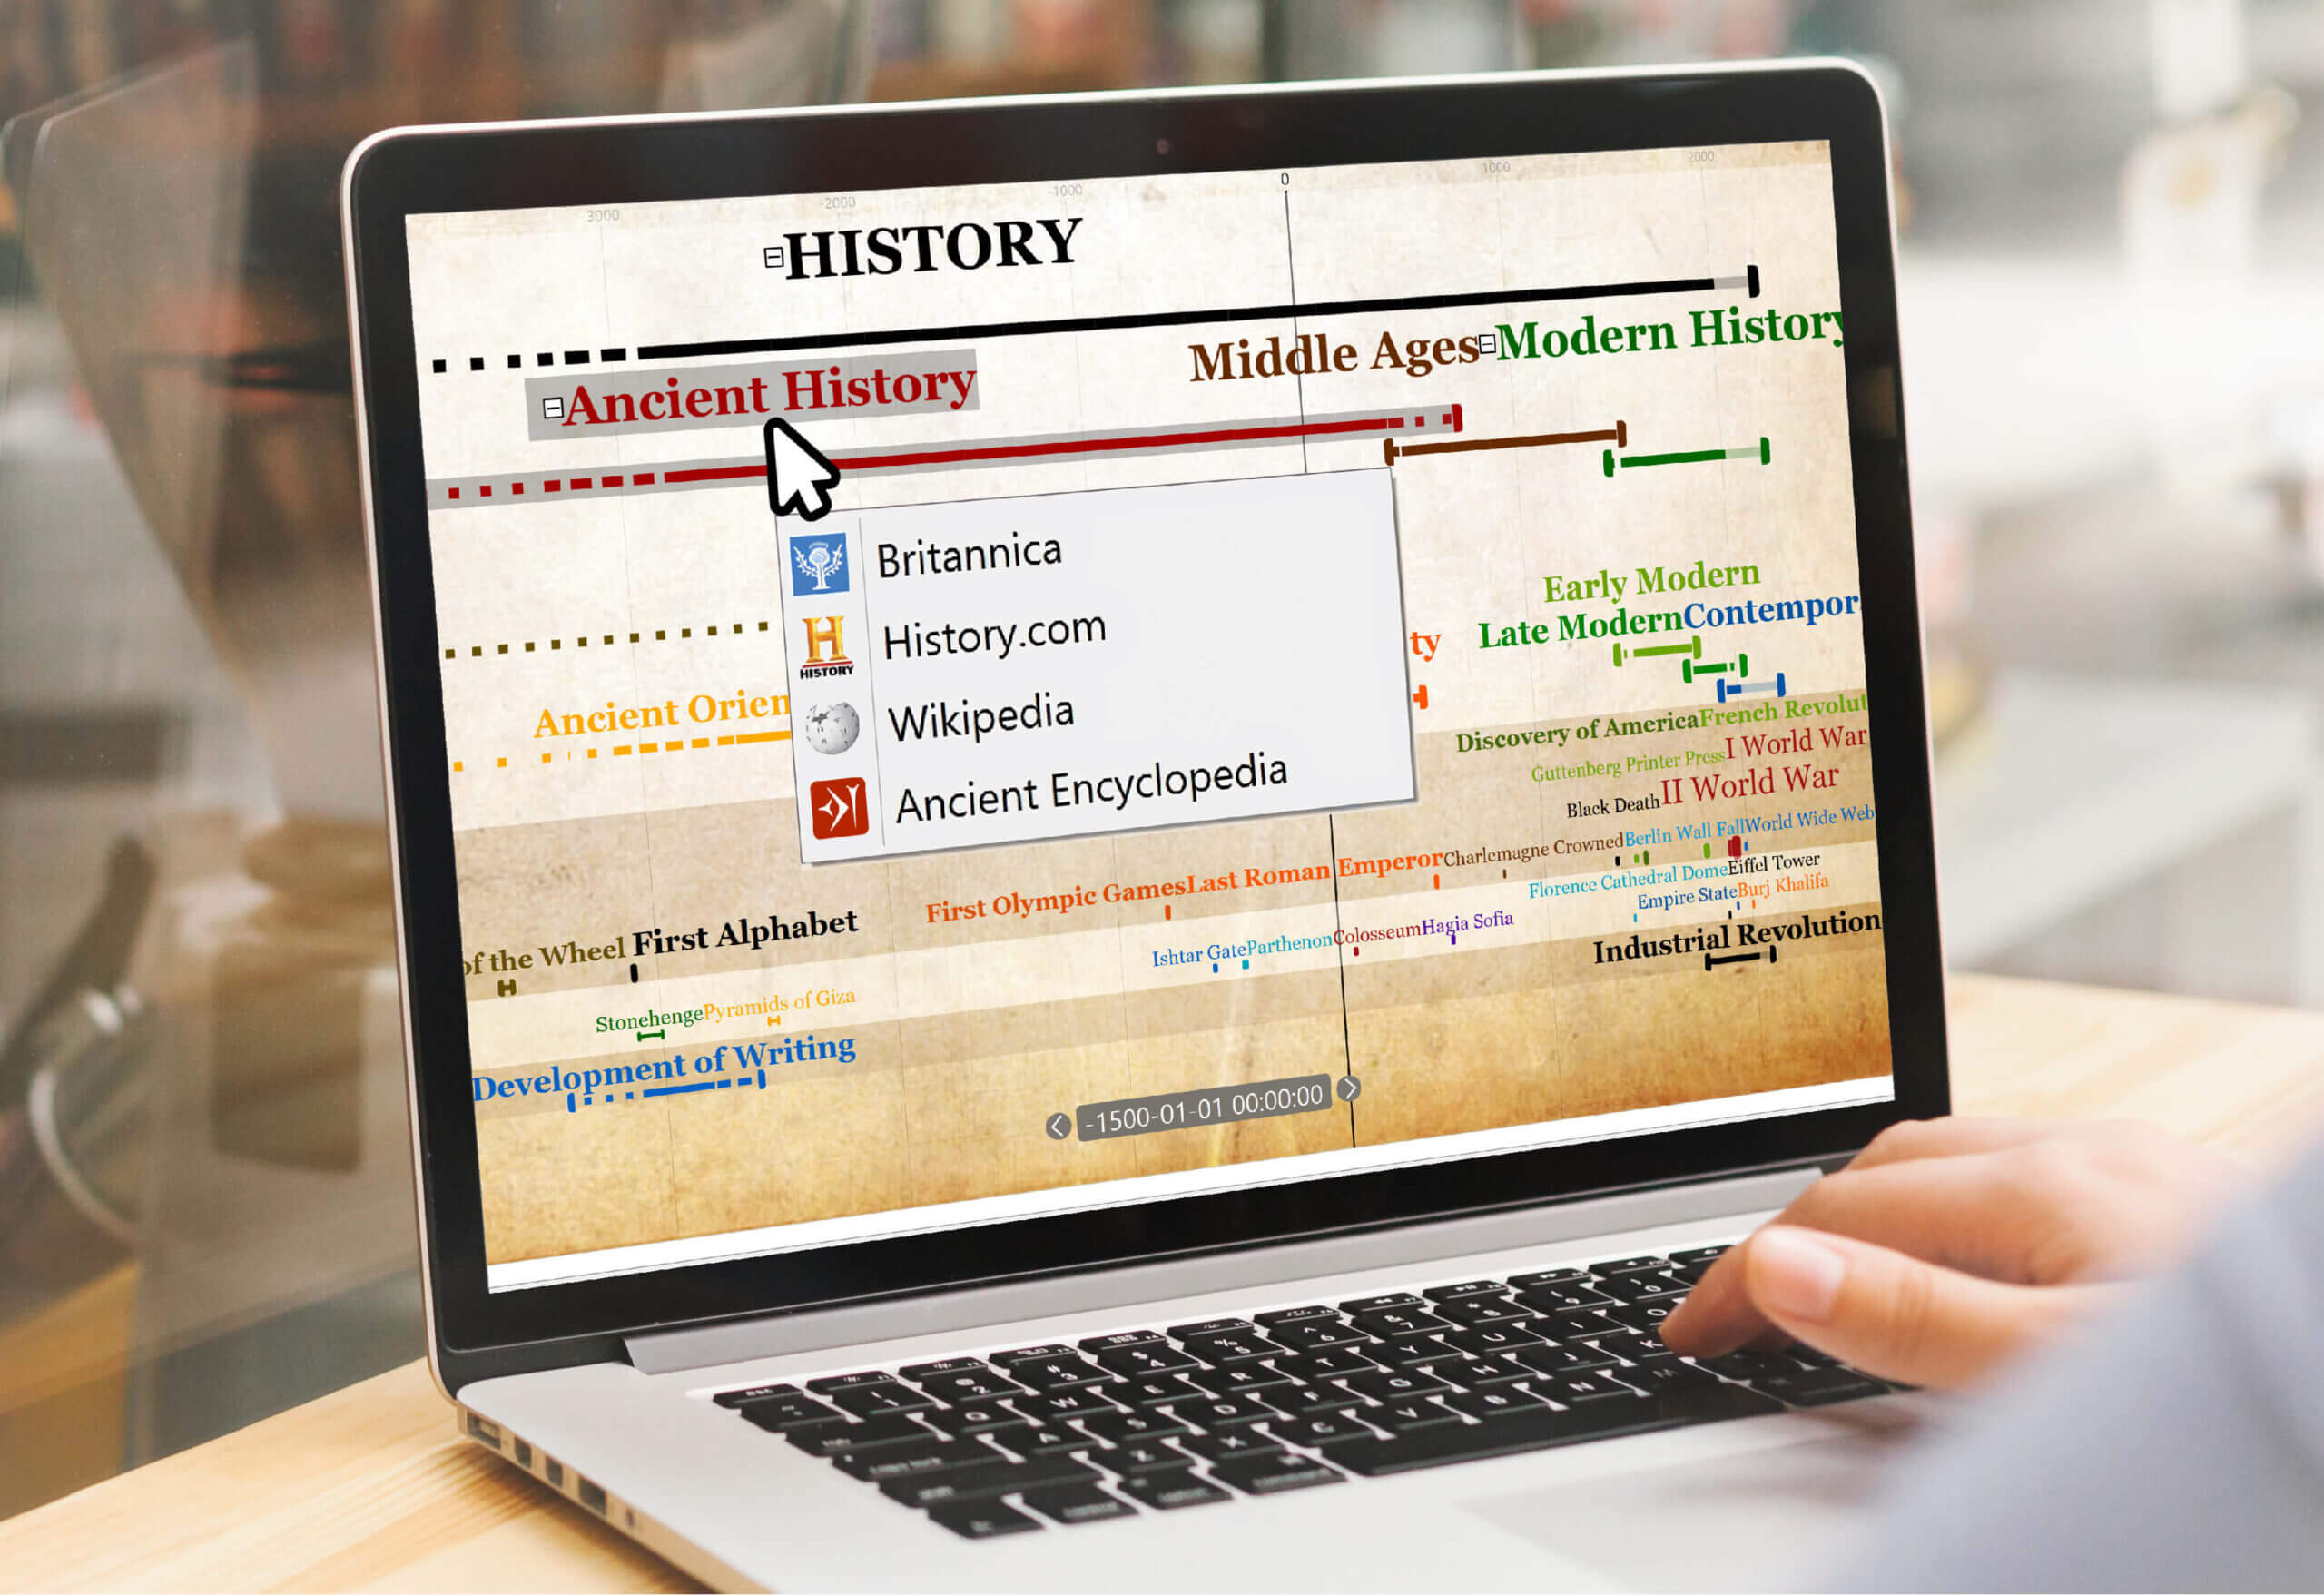 Built-in encyclopedia access from Timeline Software